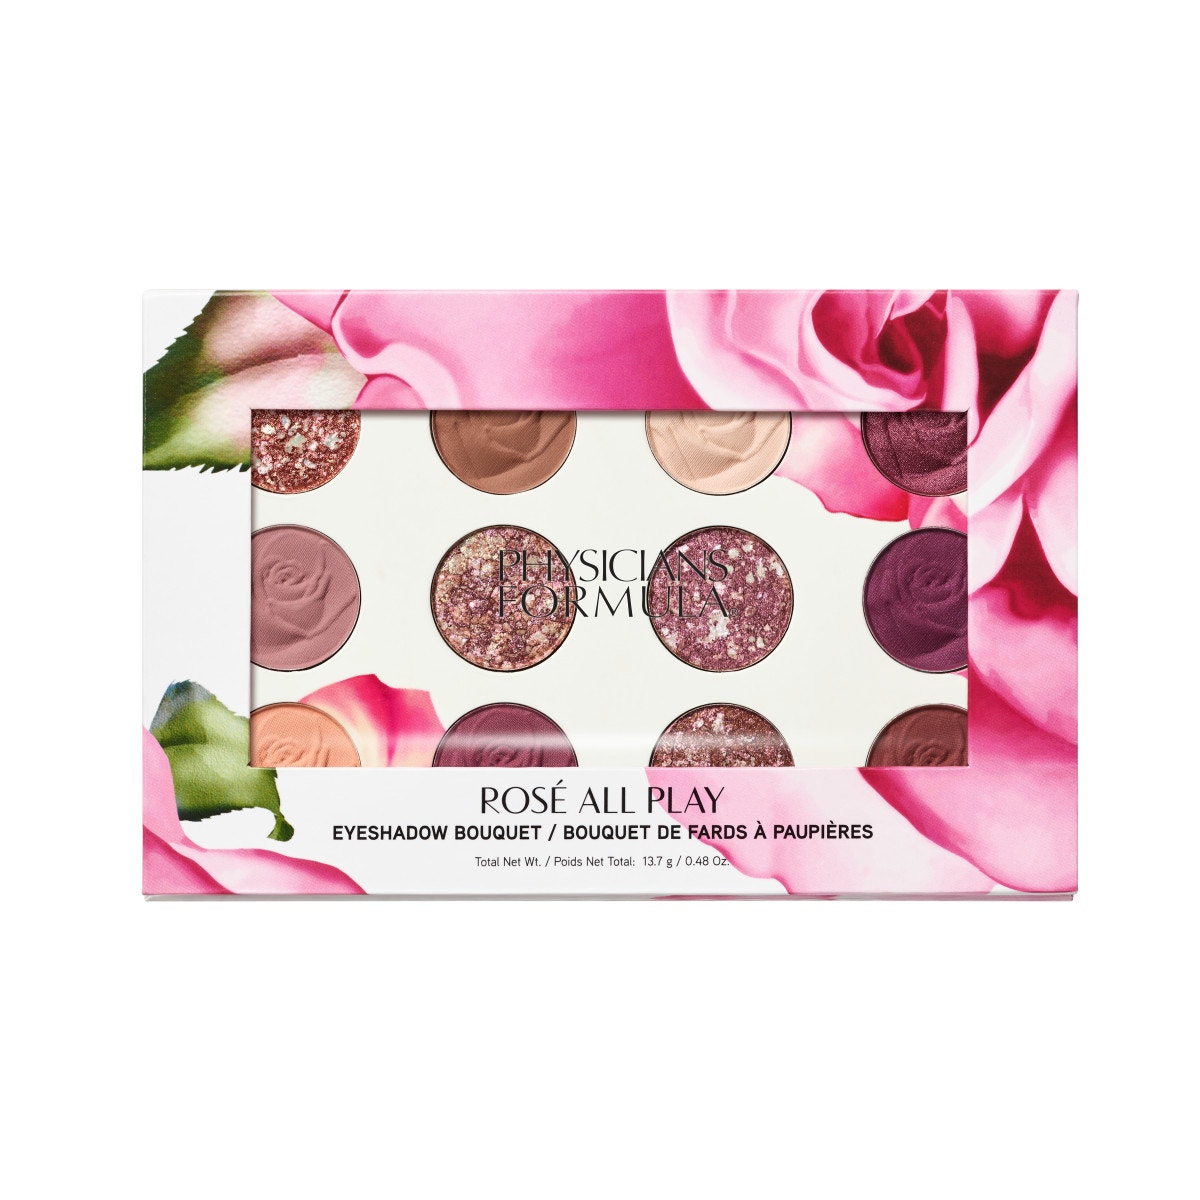  Physicians Formula Rose All Play Eyeshadow Bouquet – Pink